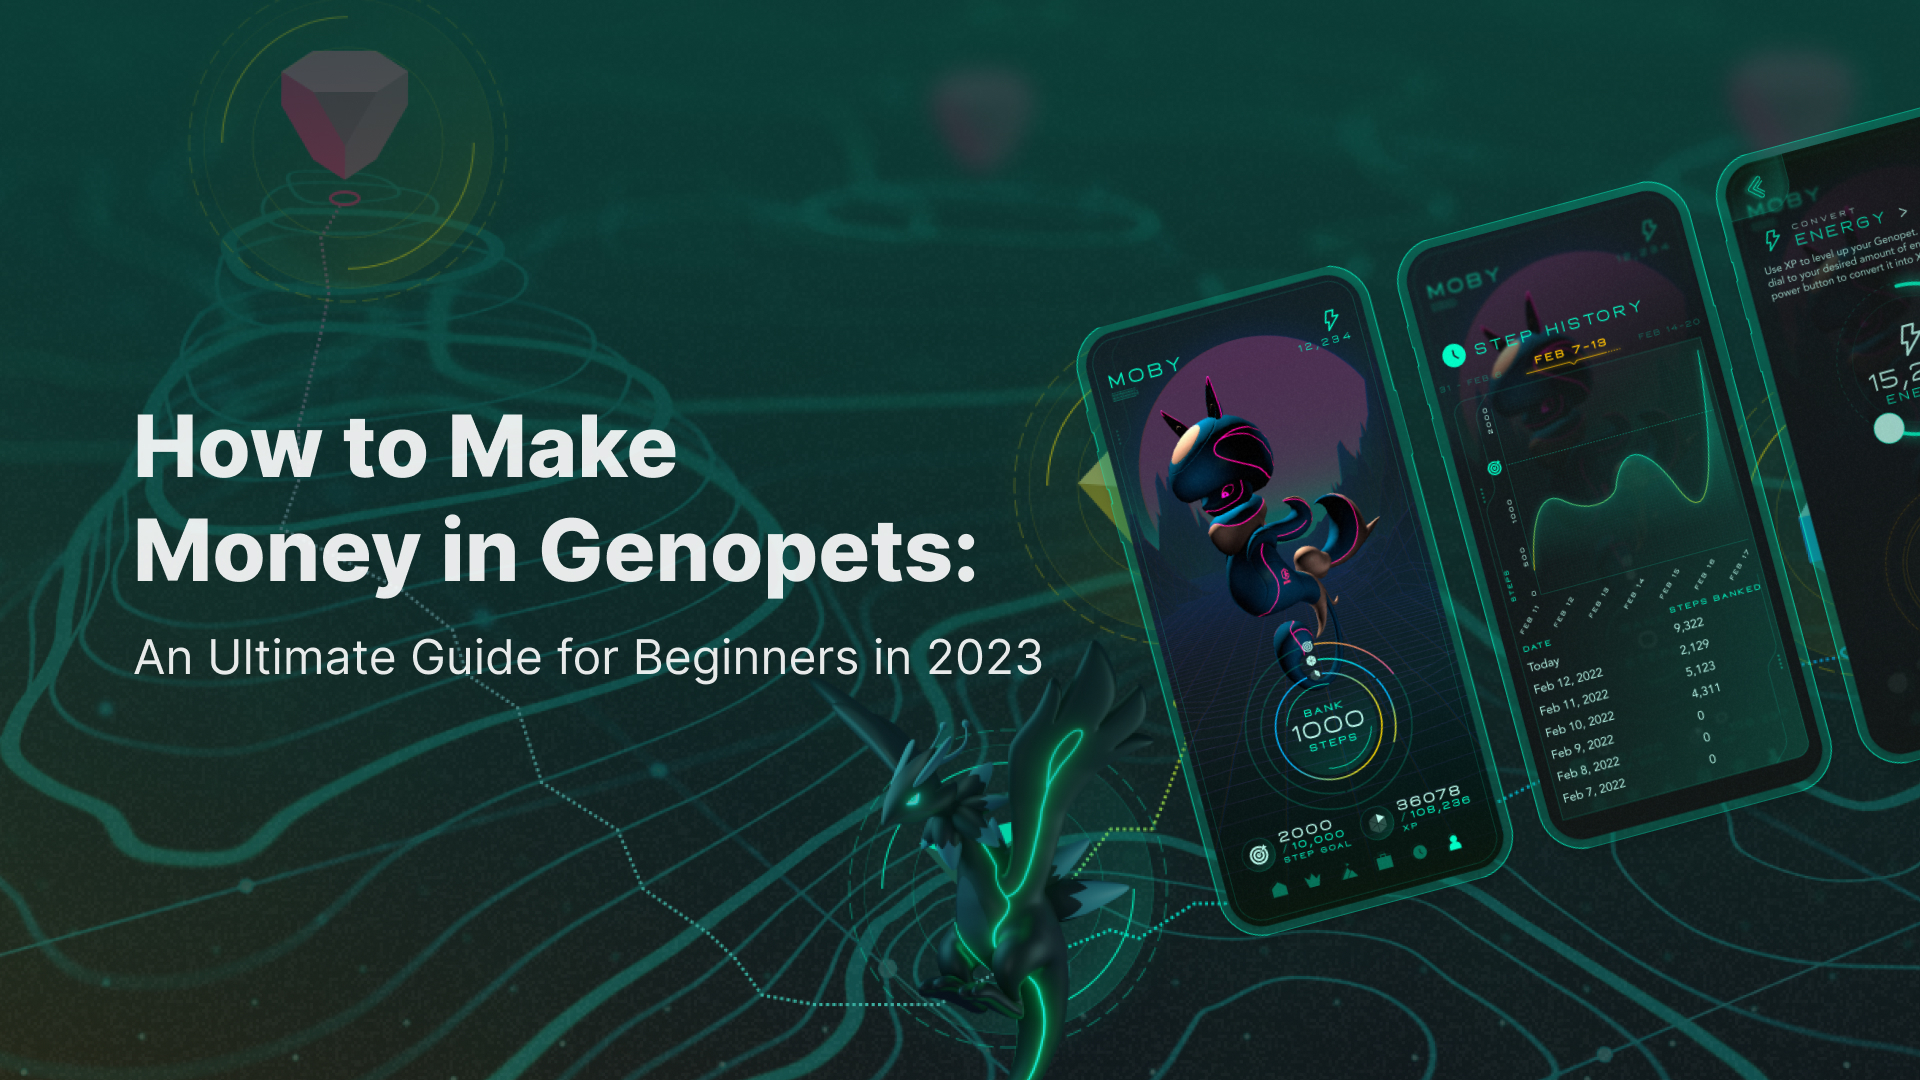 How to Make Money in Genopets: An Ultimate Guide for Beginners in 2023